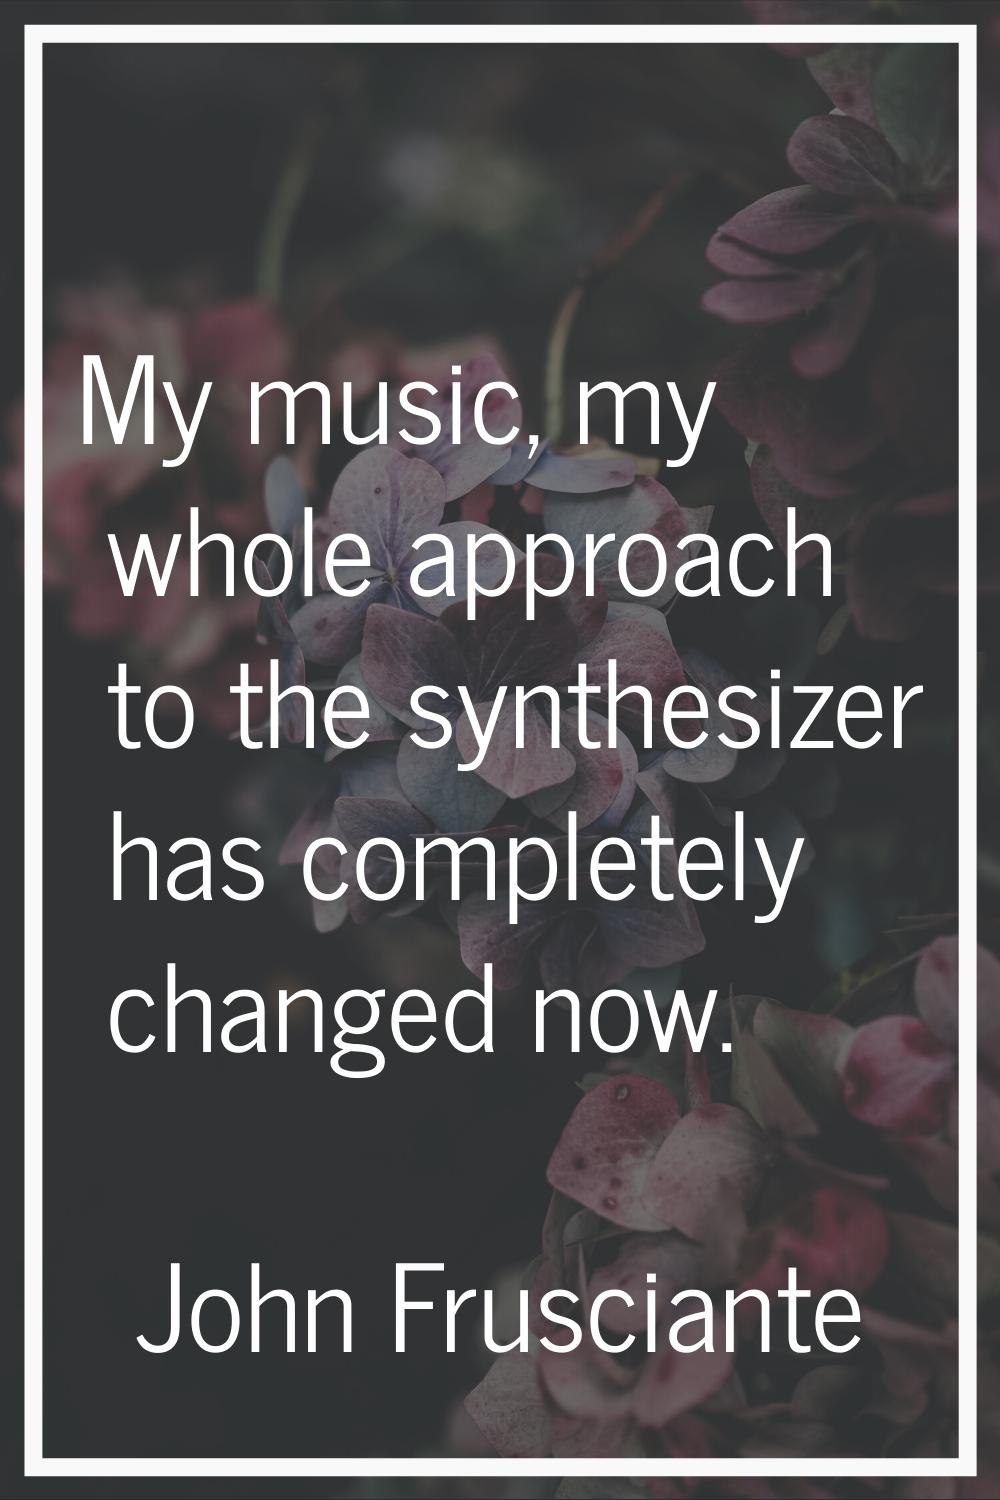 My music, my whole approach to the synthesizer has completely changed now.